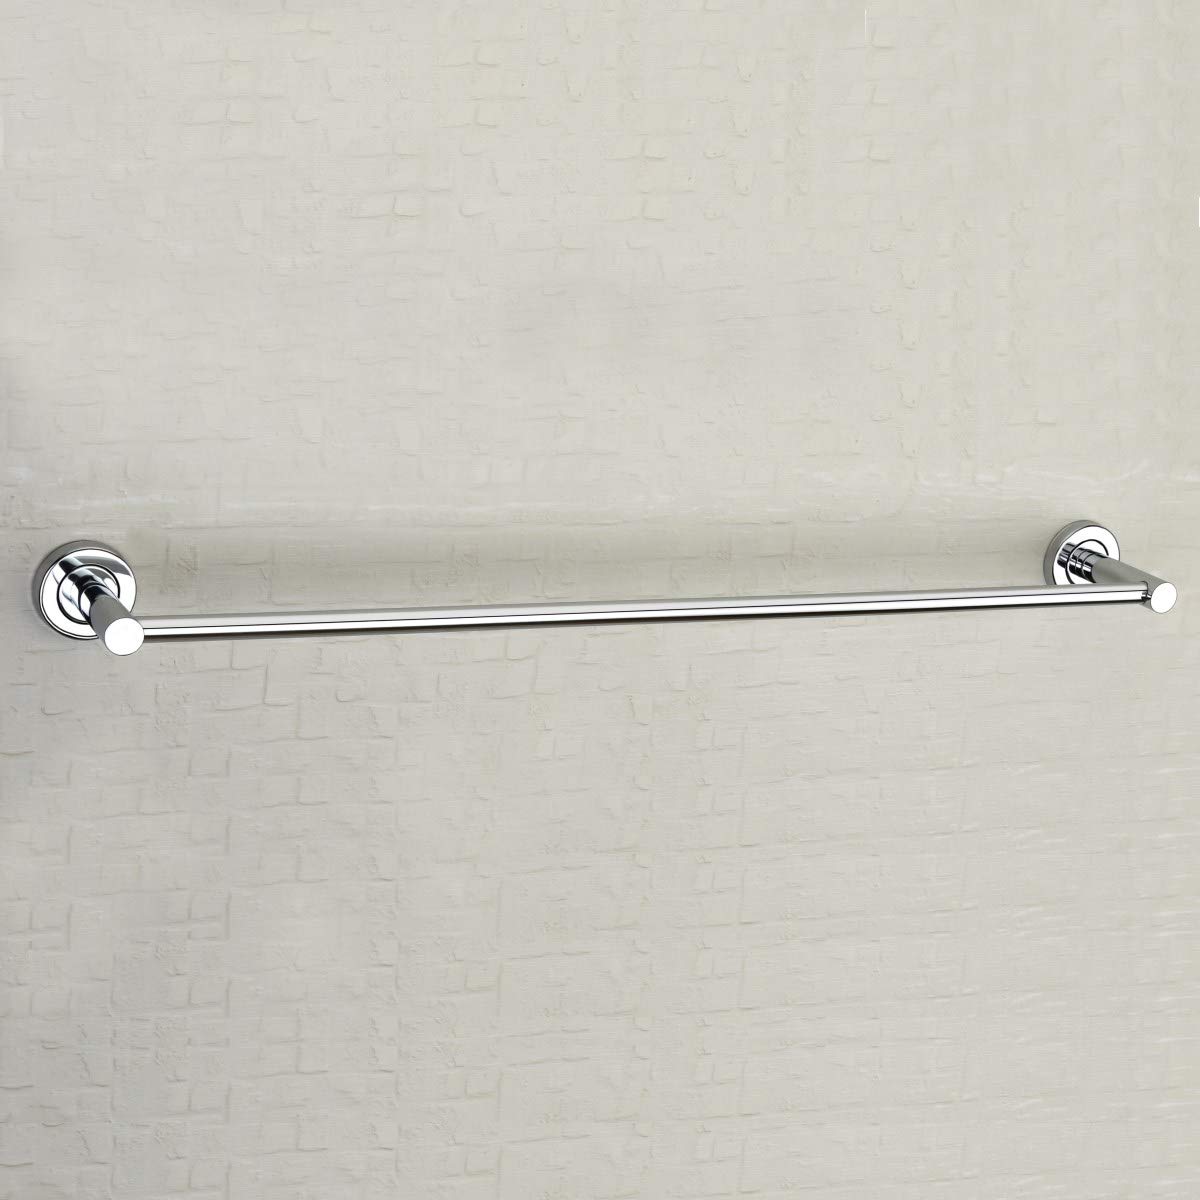 Plantex Stainless Steel Heavy Towel Rod/Towel Rack for Bathroom/Towel Bar/Hanger/Stand/Bathroom Accessories (24 Inch - Chrome Finish) - Pack of 3